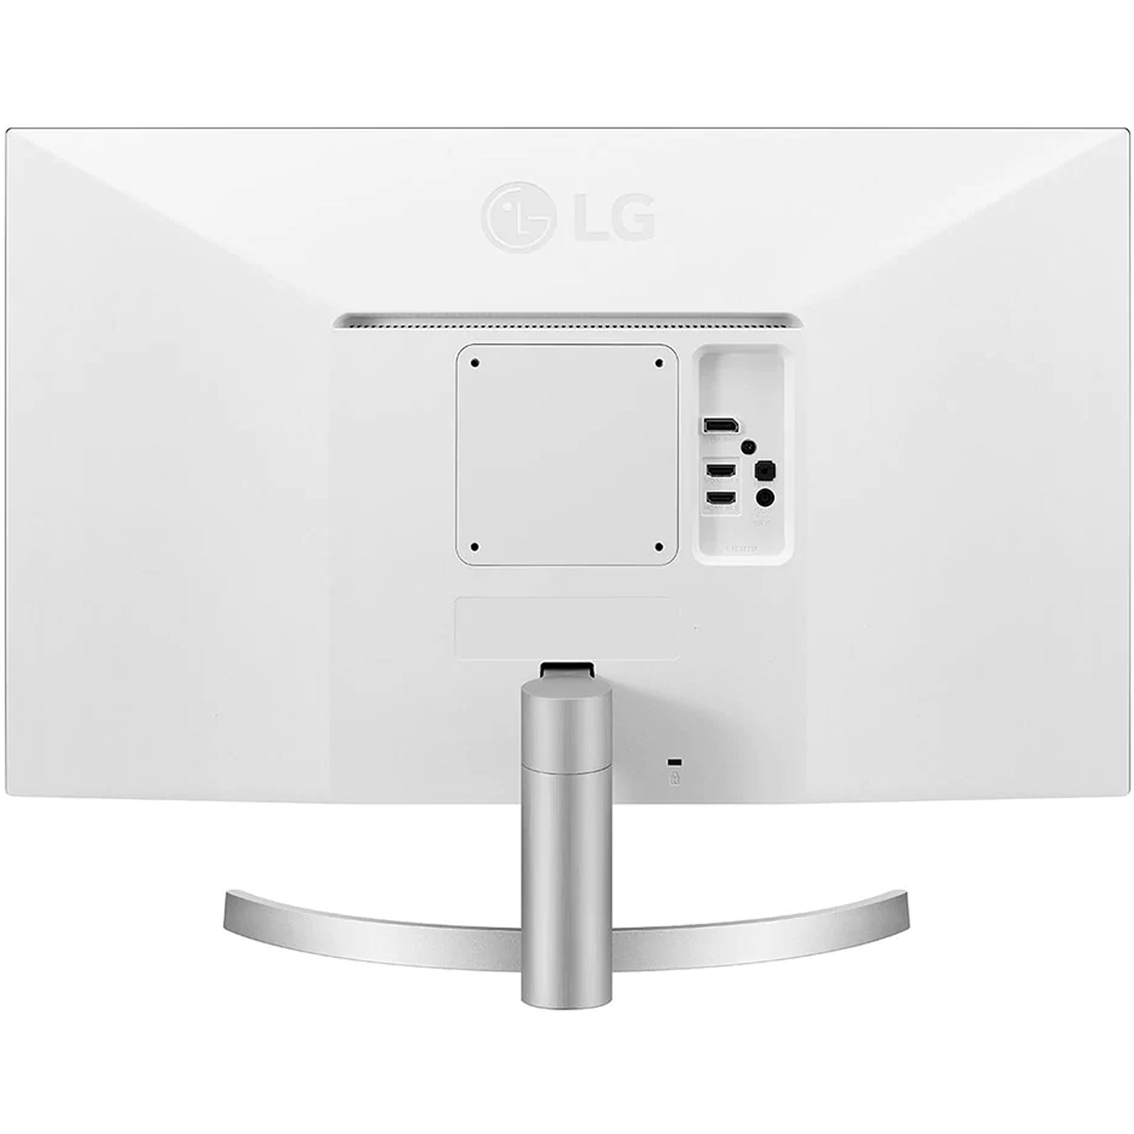 LG 27 in. 4K UHD IPS LED Monitor with HDR - Image 2 of 7